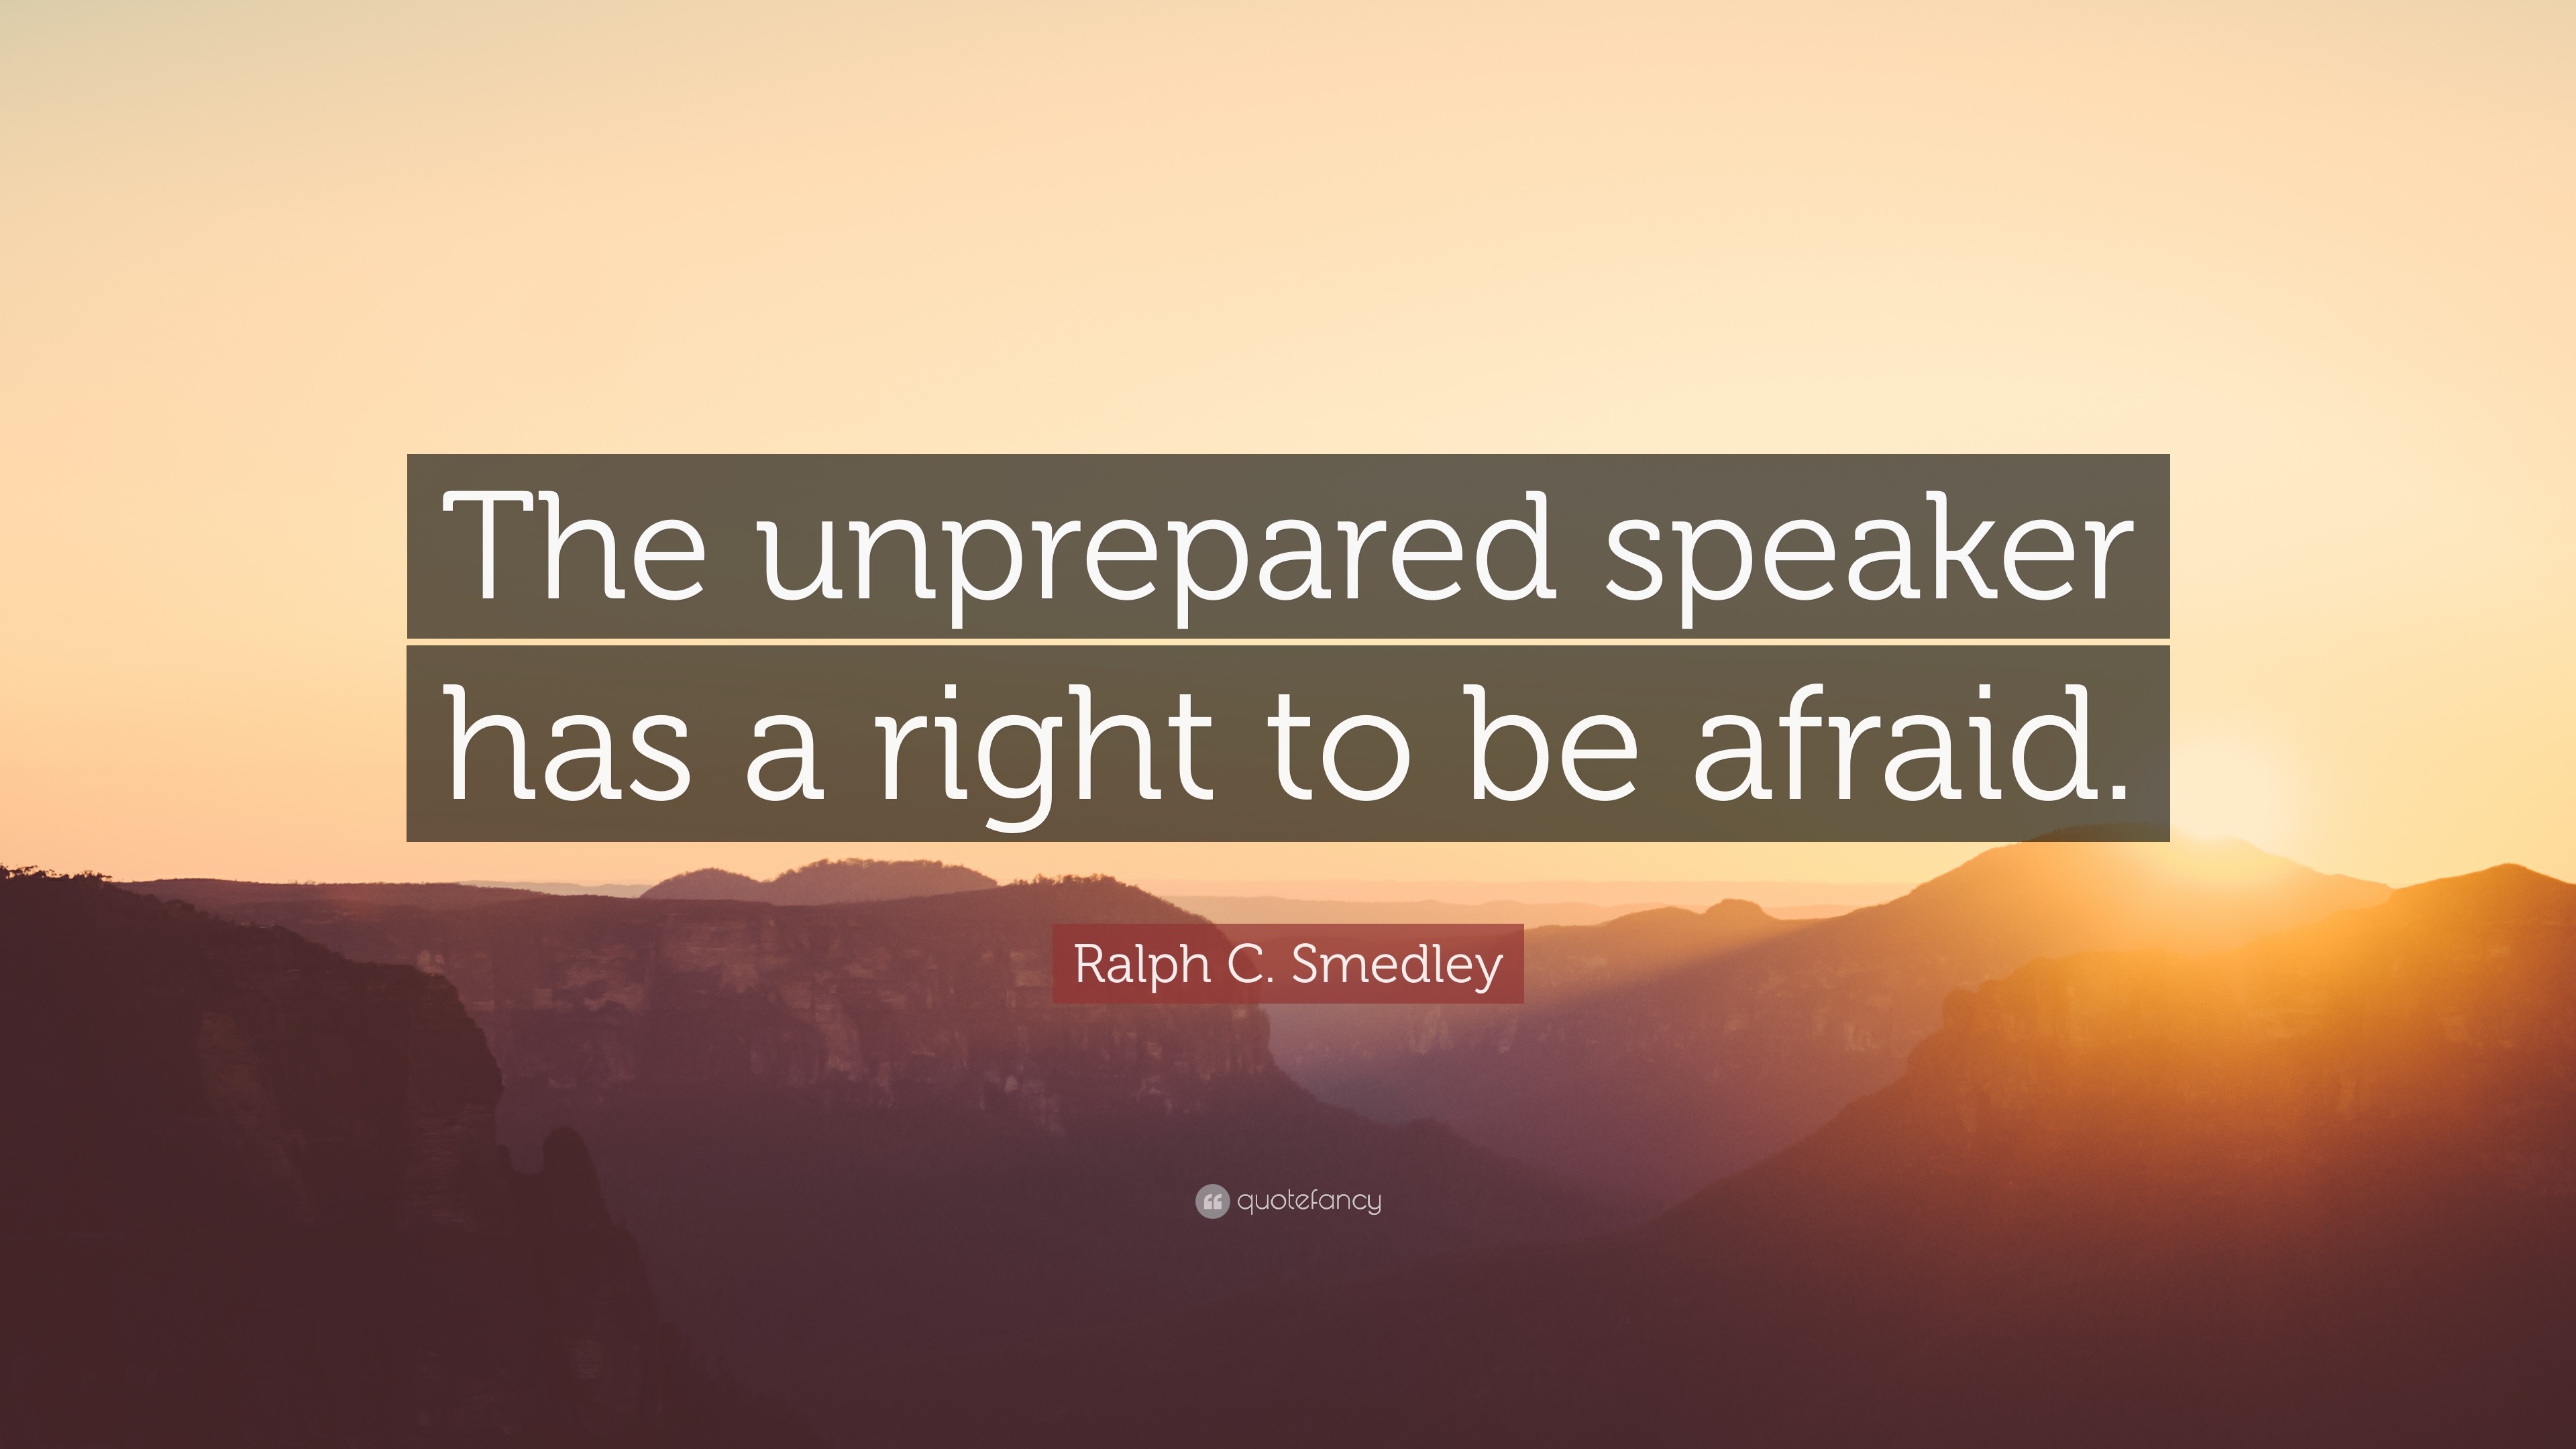 Ralph C. Smedley Quotes (7 wallpapers) - Quotefancy